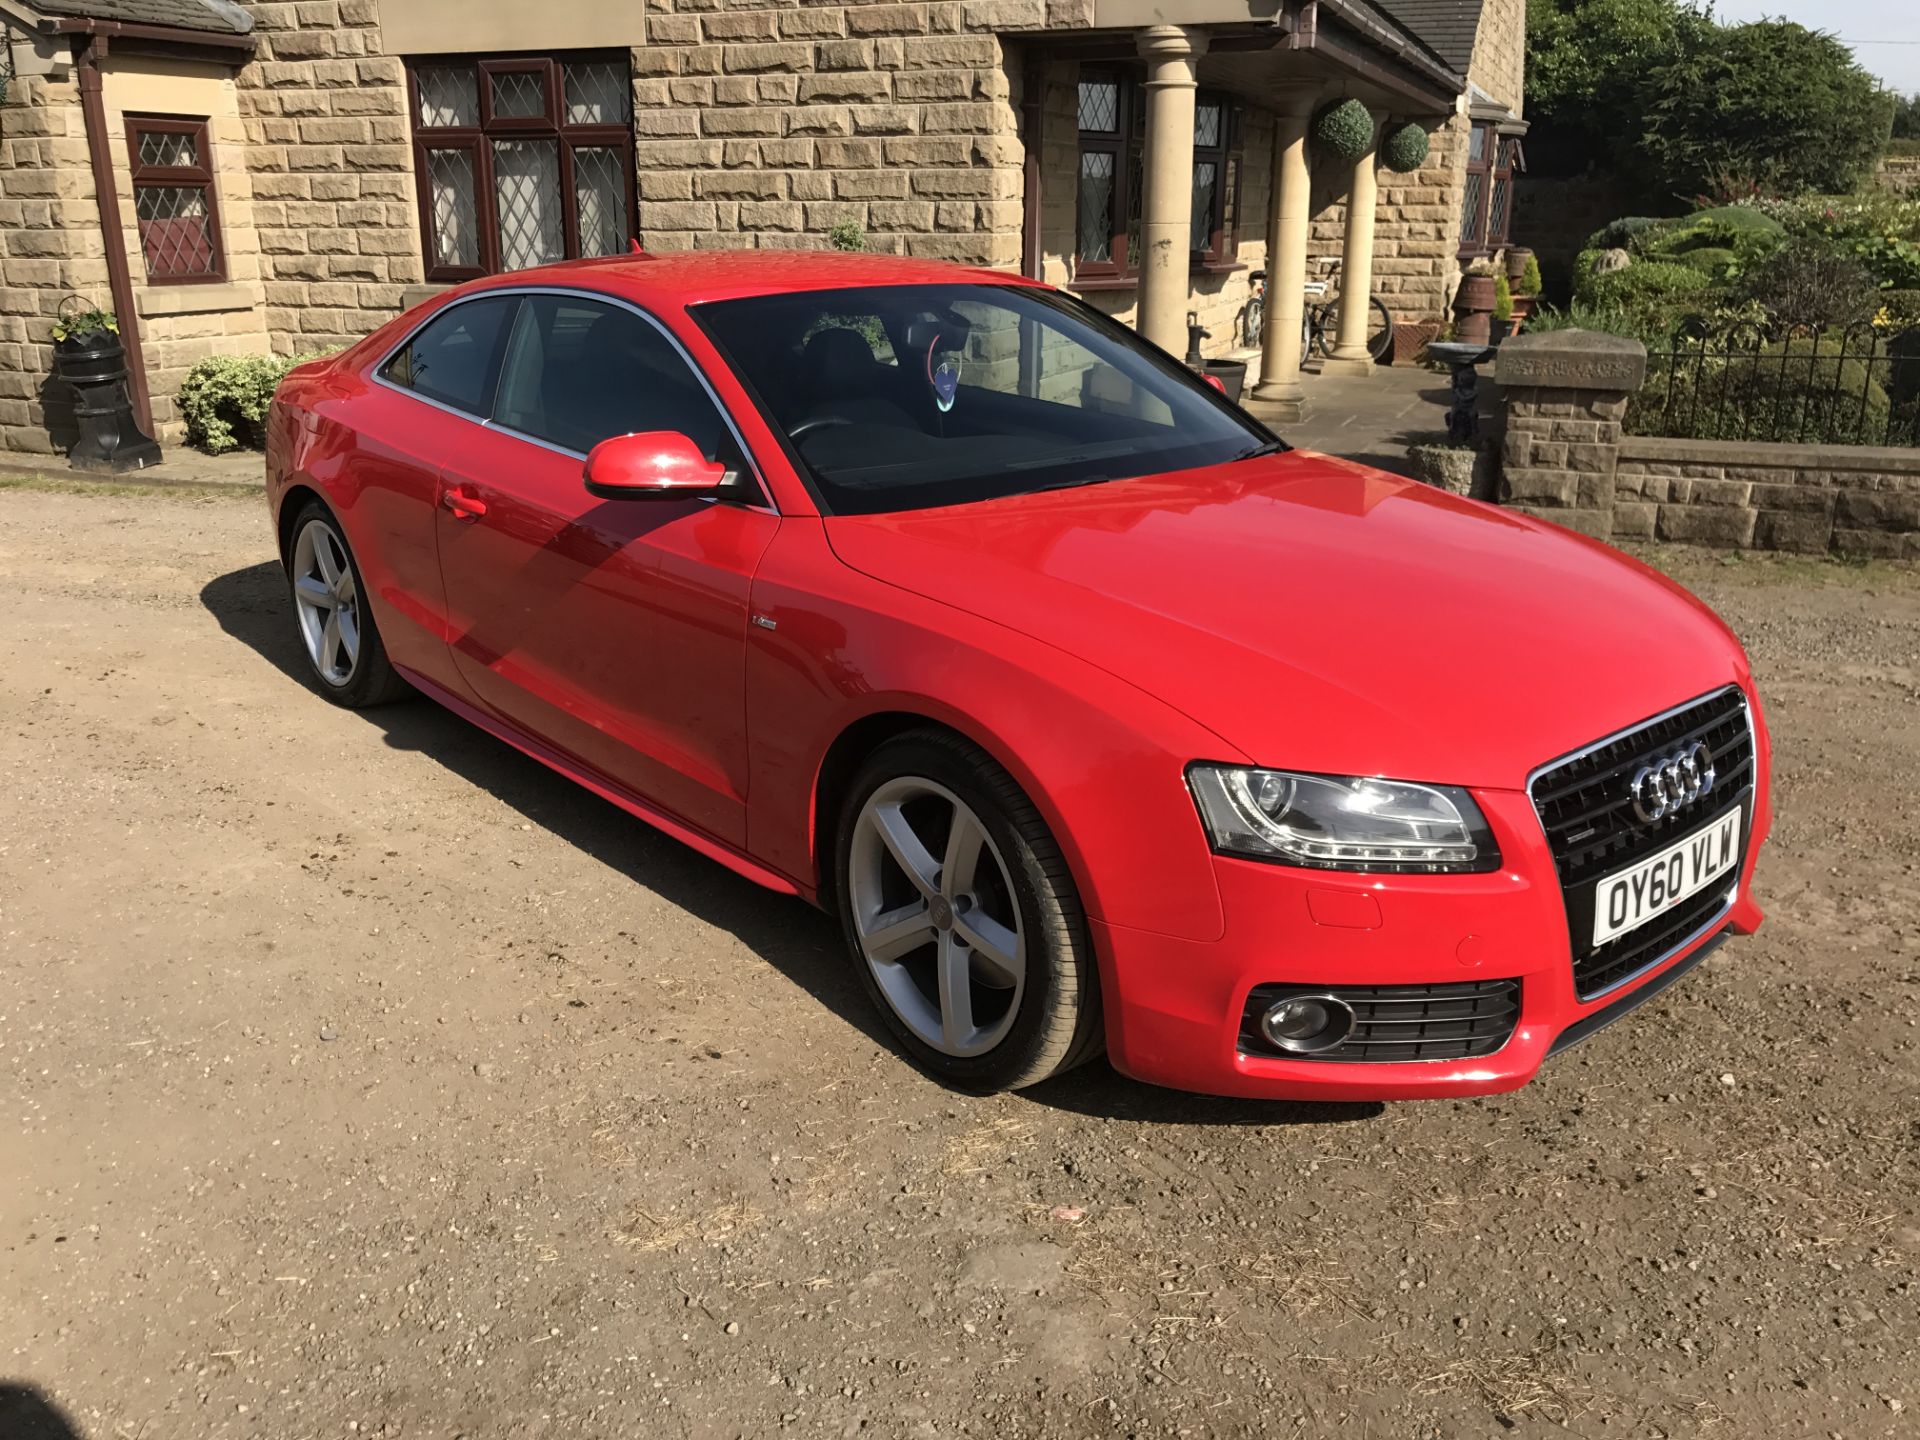 2010/60 REG AUDI A5 S LINE TDI QUATTRO SEMI-AUTOMATIC 3.0 LITRE, SHOWING 2 FORMER KEEPERS *NO VAT* - Image 2 of 19